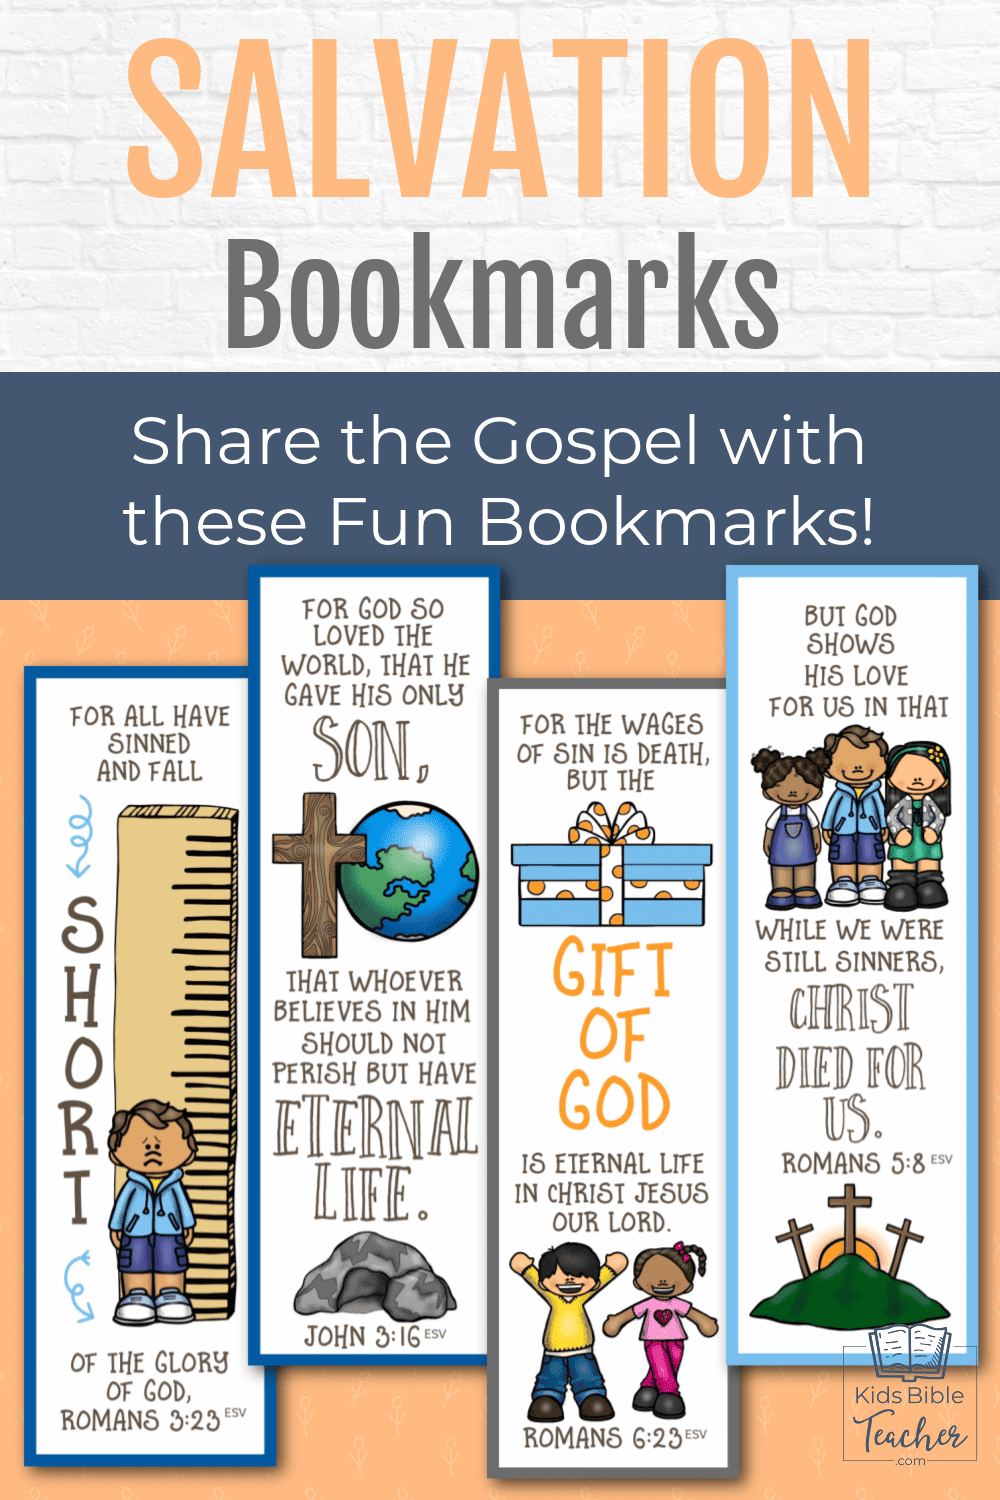 Looking for a super simple project for your kids or Sunday school class? Try these free printable Salvation bookmarks featuring Bible verses.